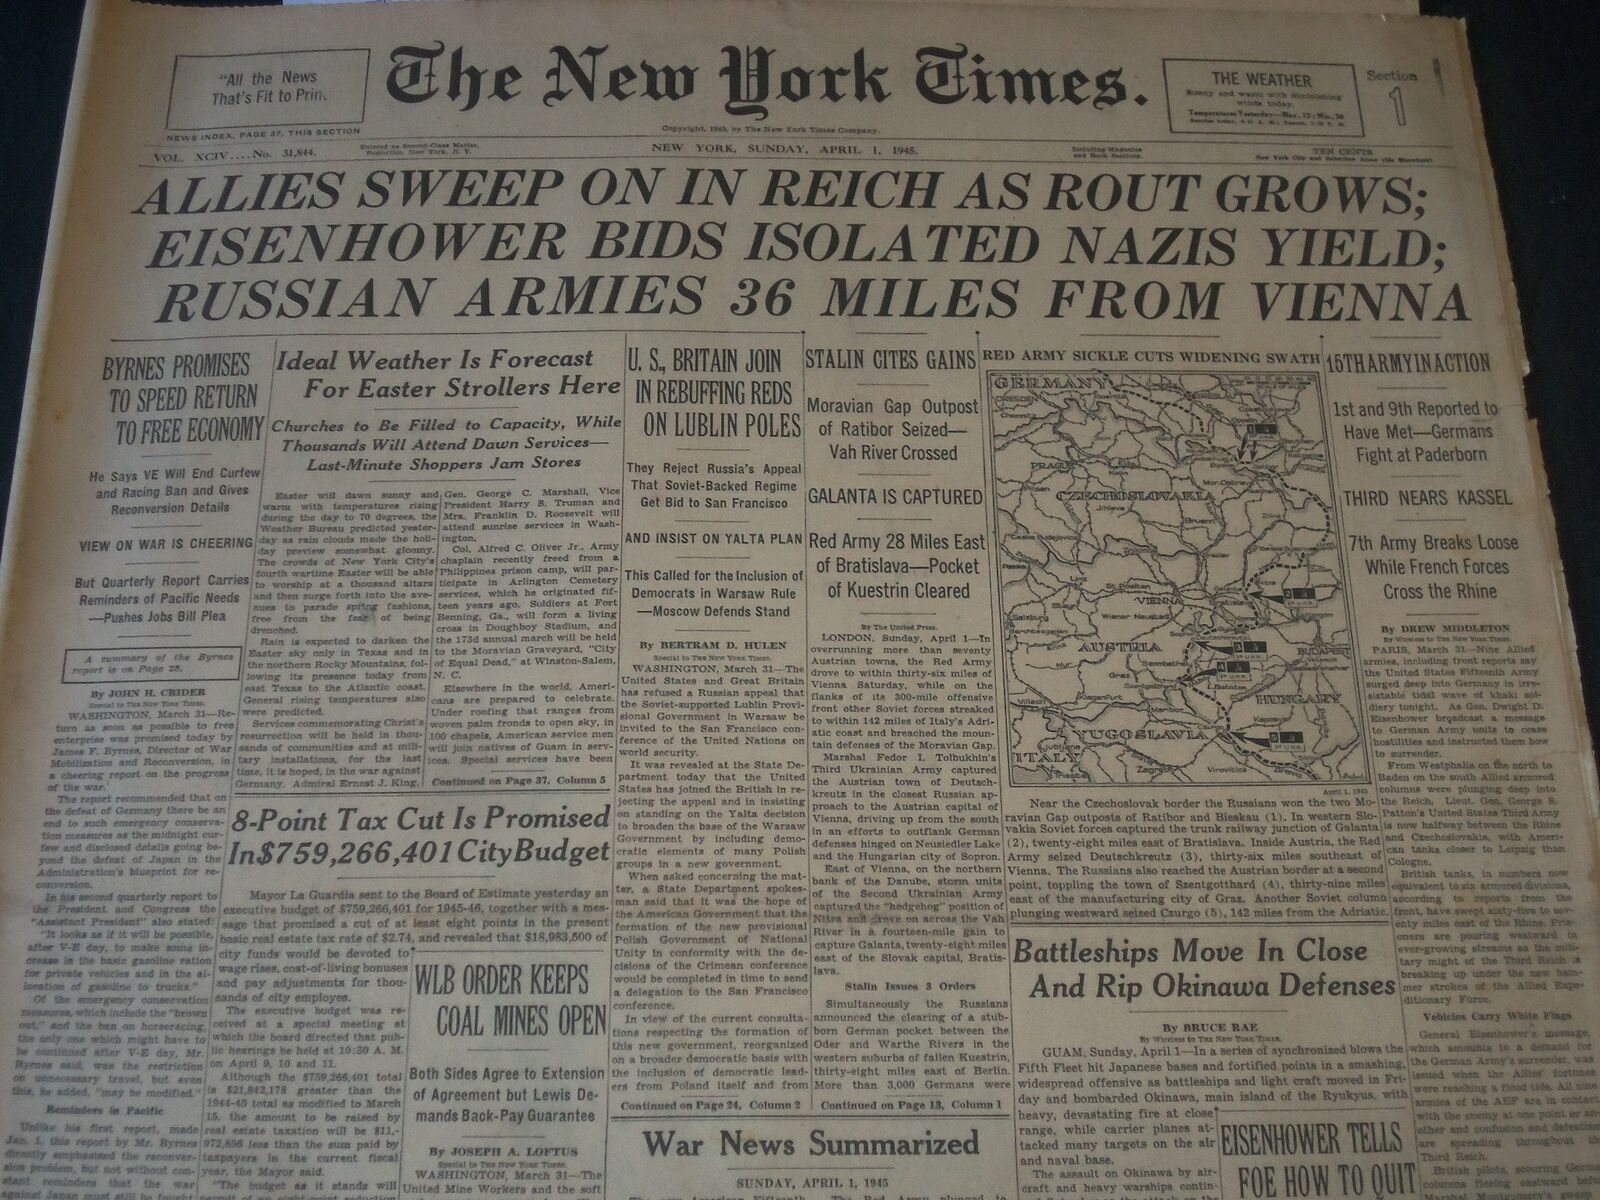 1945 APRIL 1 NEW YORK TIMES NEWSPAPER -ALLIES SWEEP IN REICH ROUT GROWS- NT 7285